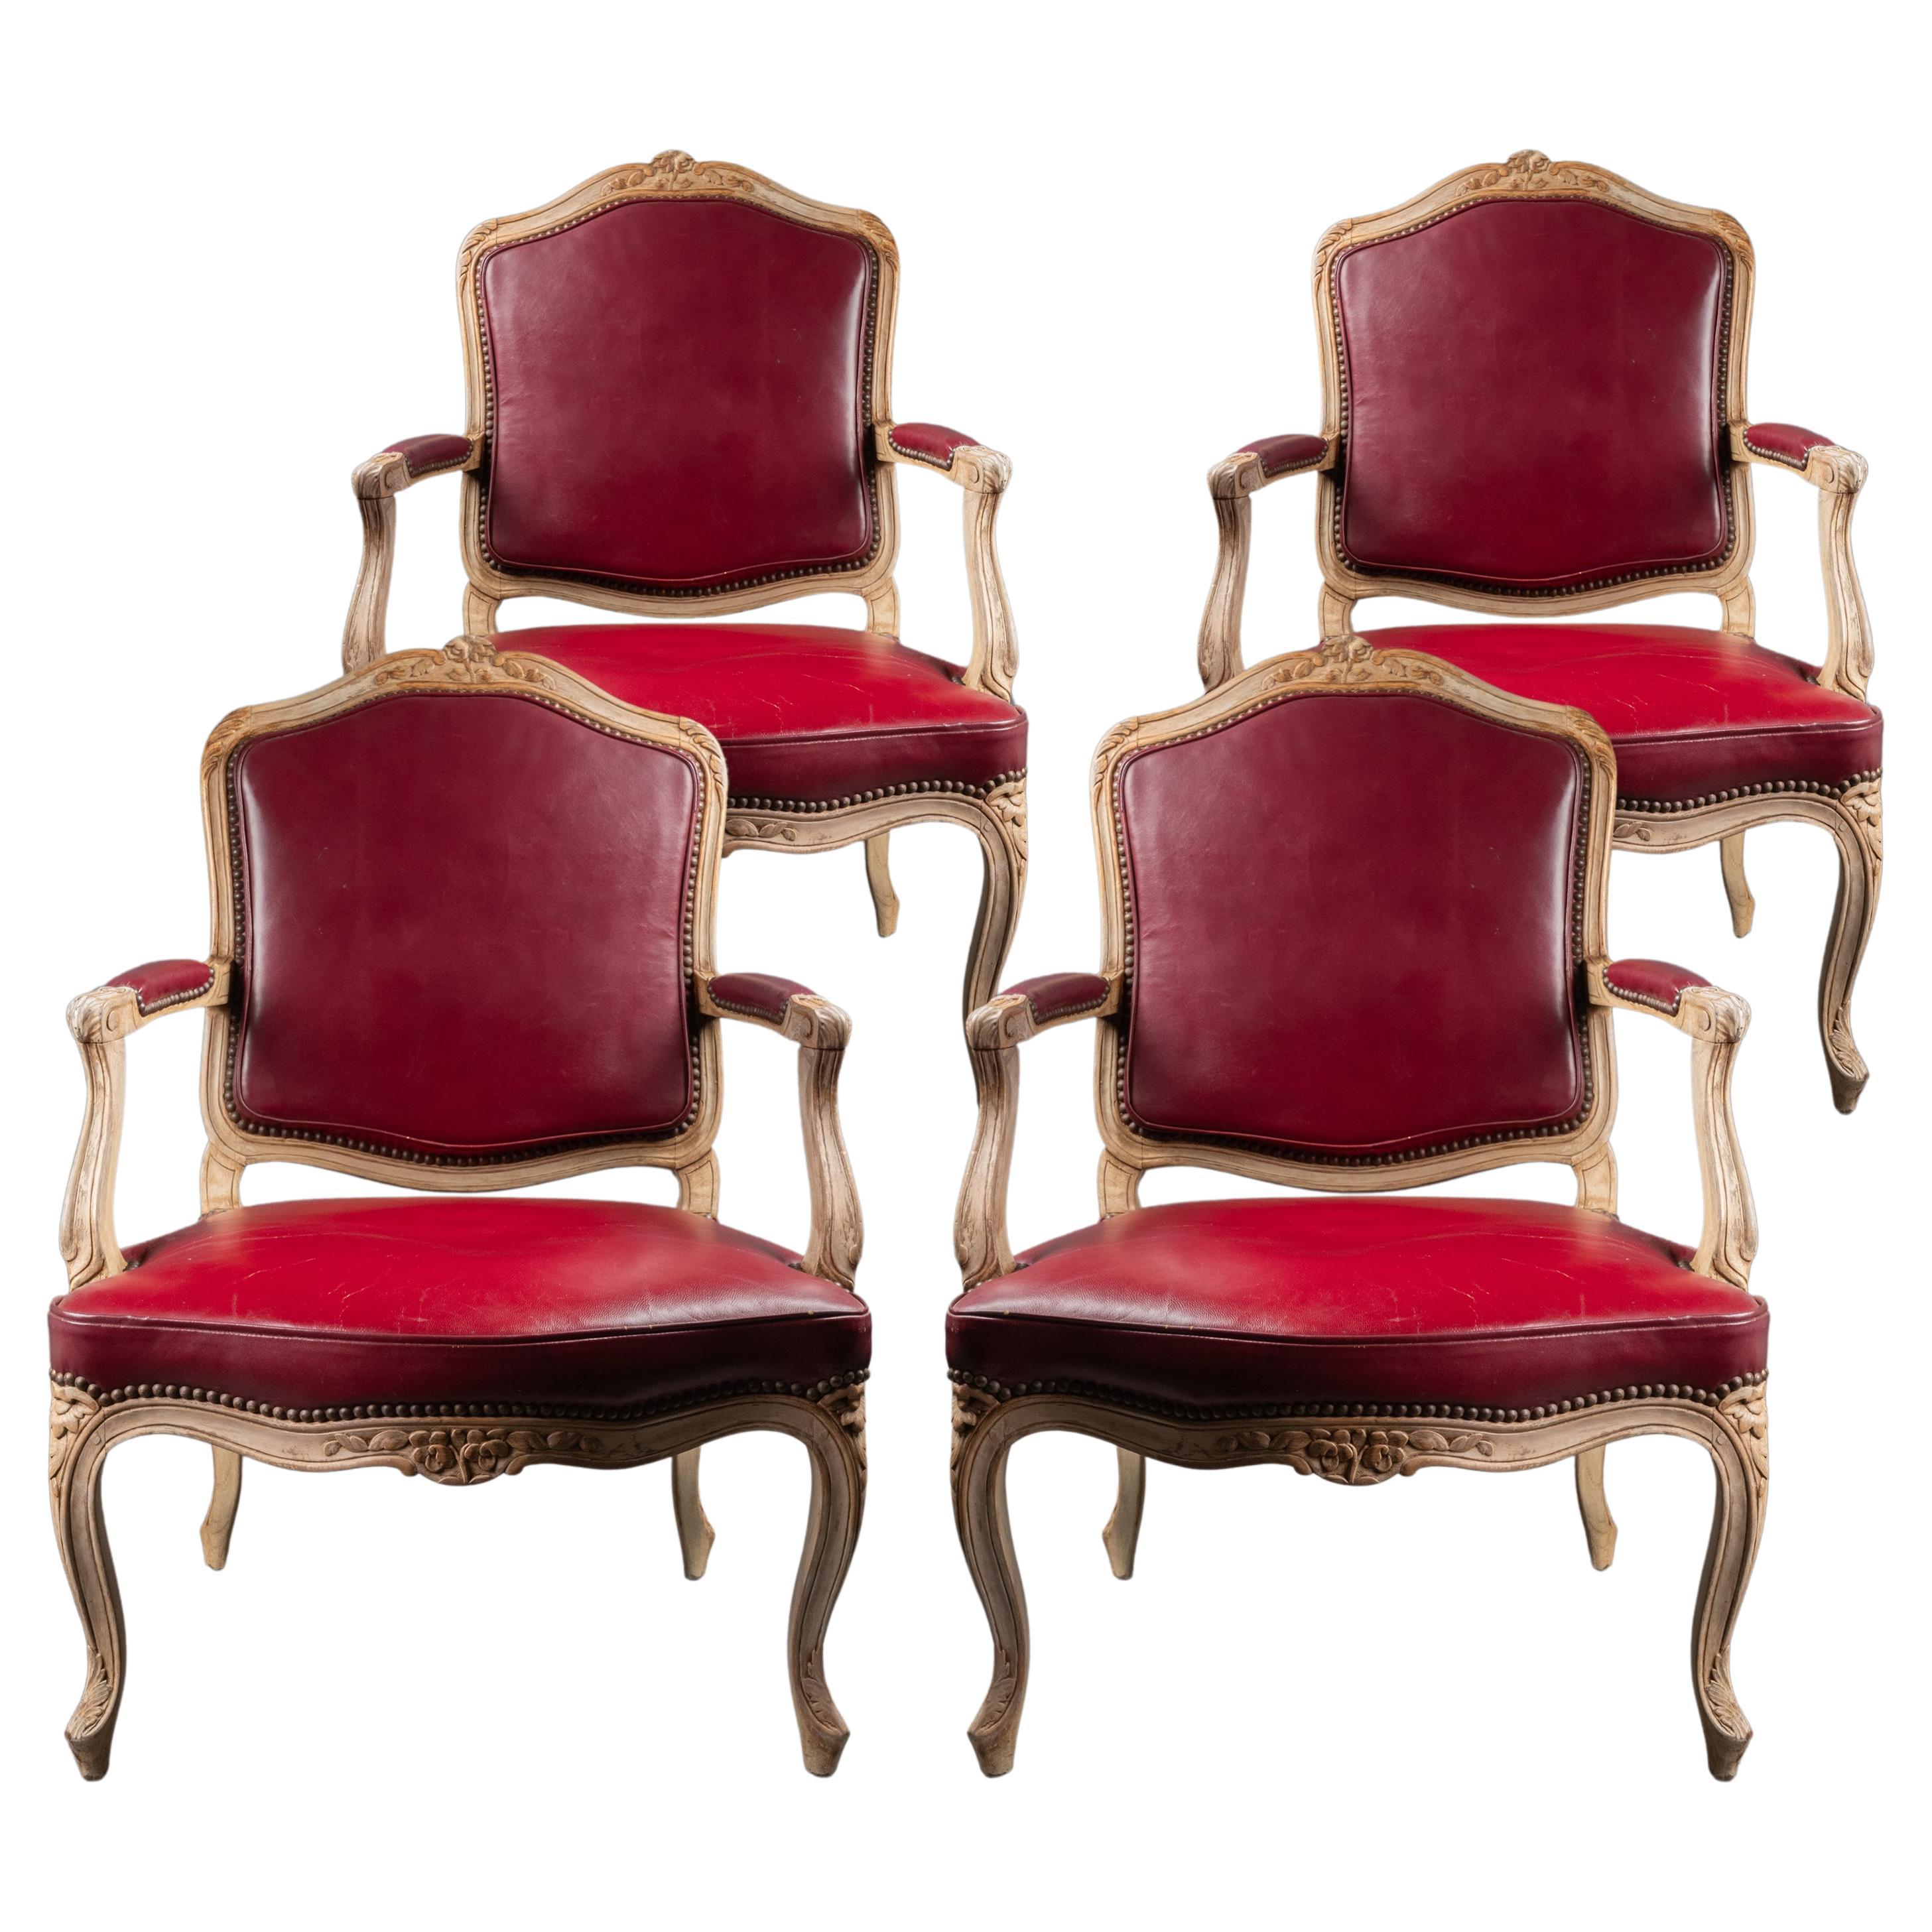 A set of four French Louis XV 18th century lacquered wood armchairs